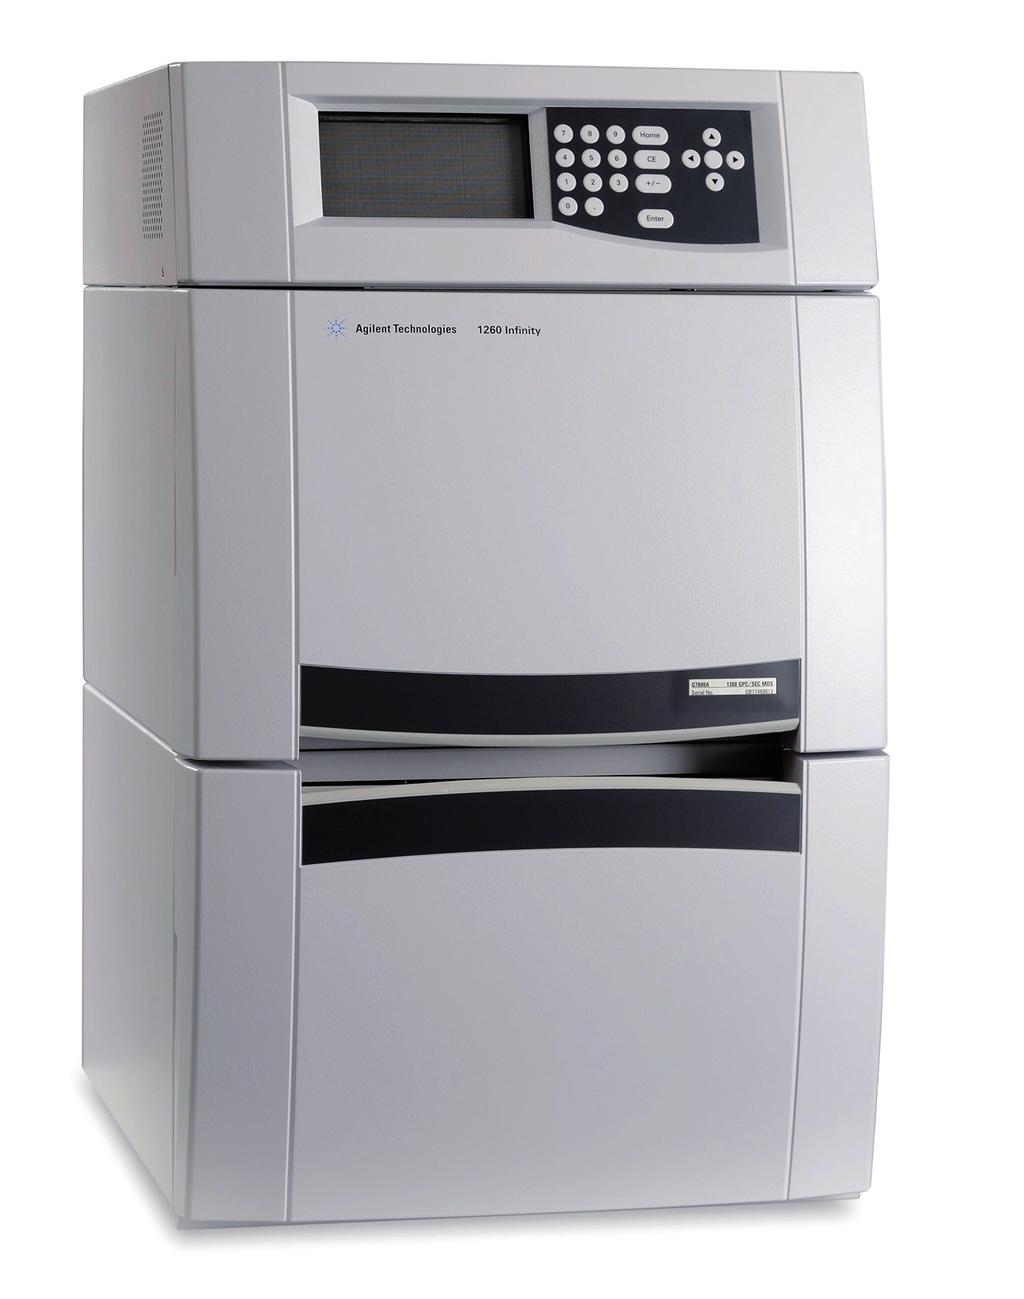 Real-world applications with the Agilent 1260 Infinity Multi Detector Suite (MDS) The 1260 Infinity MDS is an integrated detector suite designed as a simple add-on to any liquid chromatography system